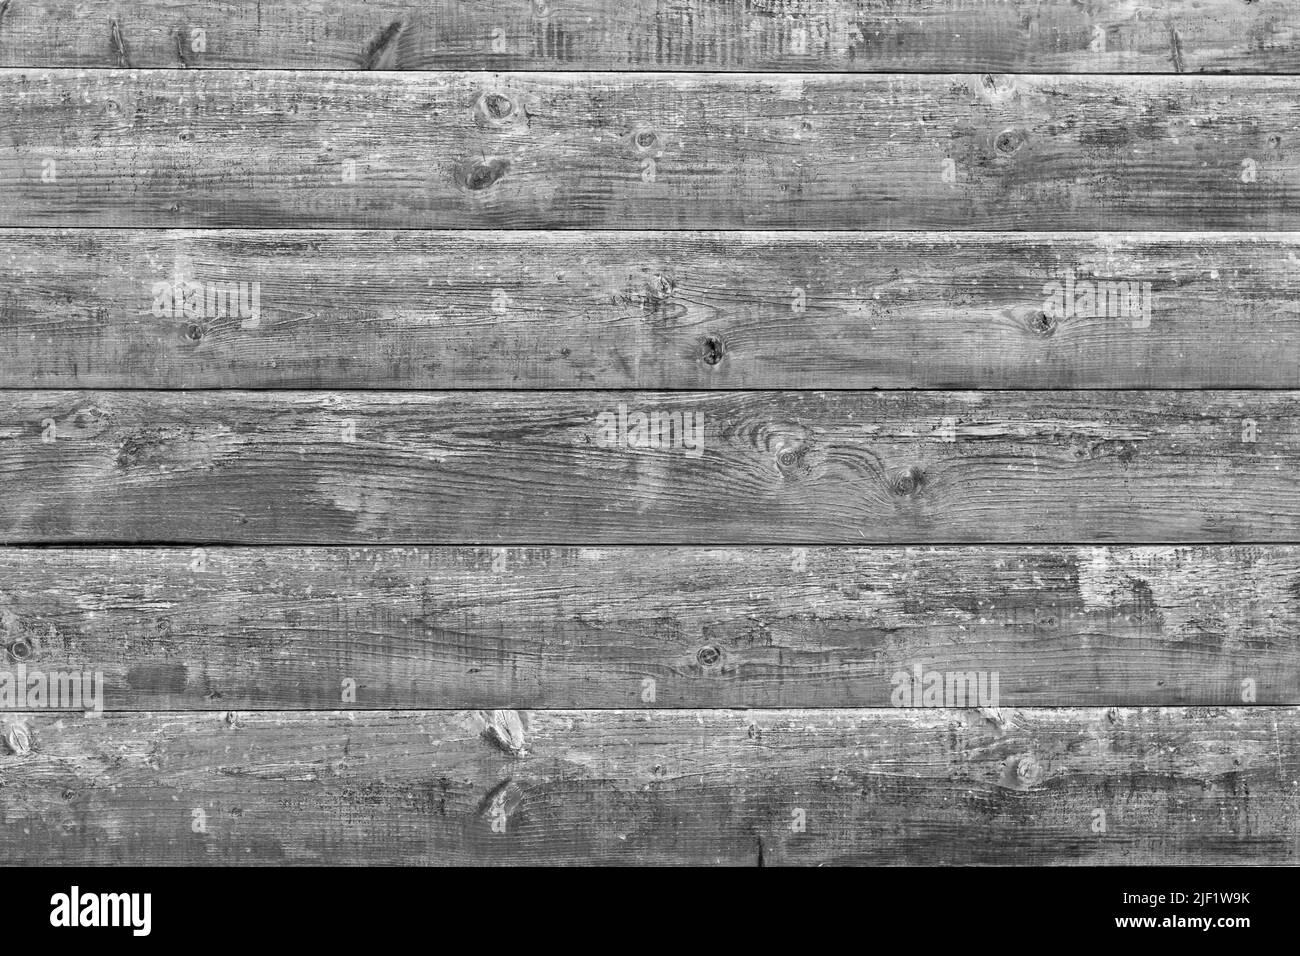 Old wood texture. Gray vintage wooden table. Retro style, faded boards, grey natural background. Weathered surface, grunge planks. Rustic design eleme Stock Photo